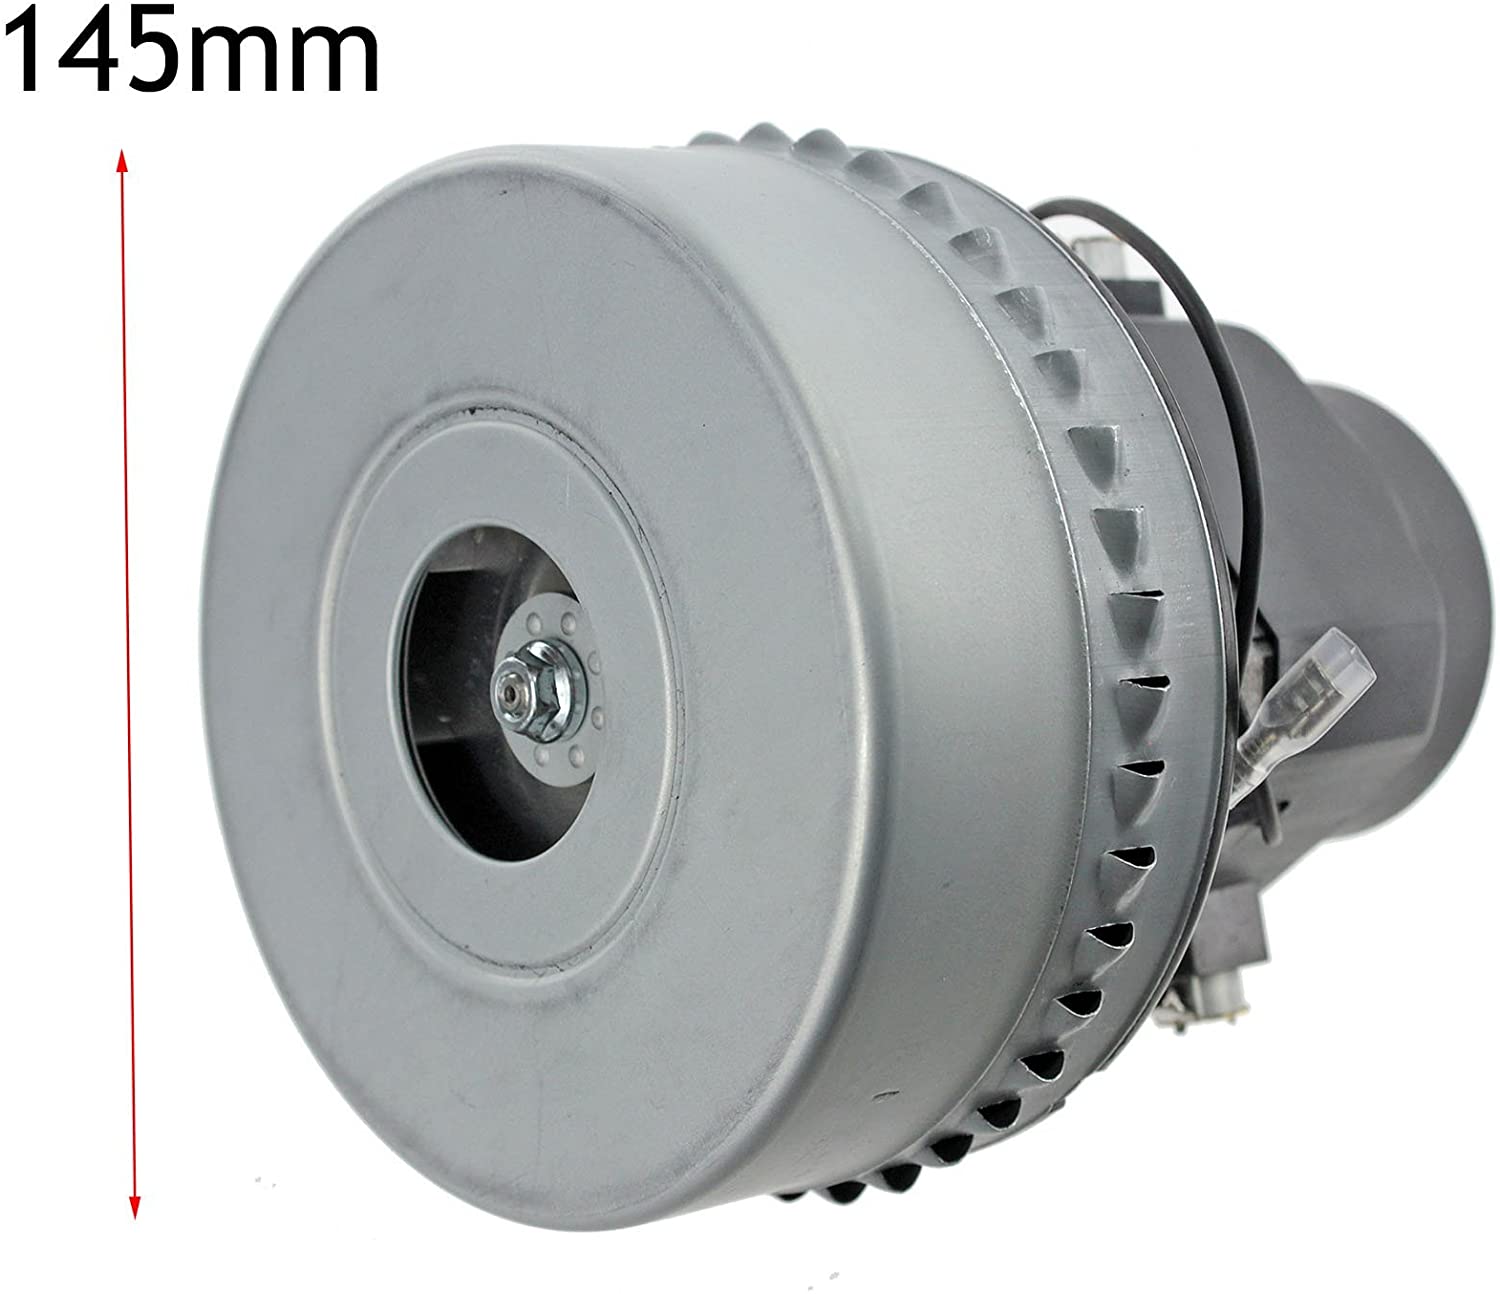 Wet & Dry Motor for CRAFTEX Vacuum Cleaners 1200W 2 Stage Bypass (5.7" / 145mm, 230V)